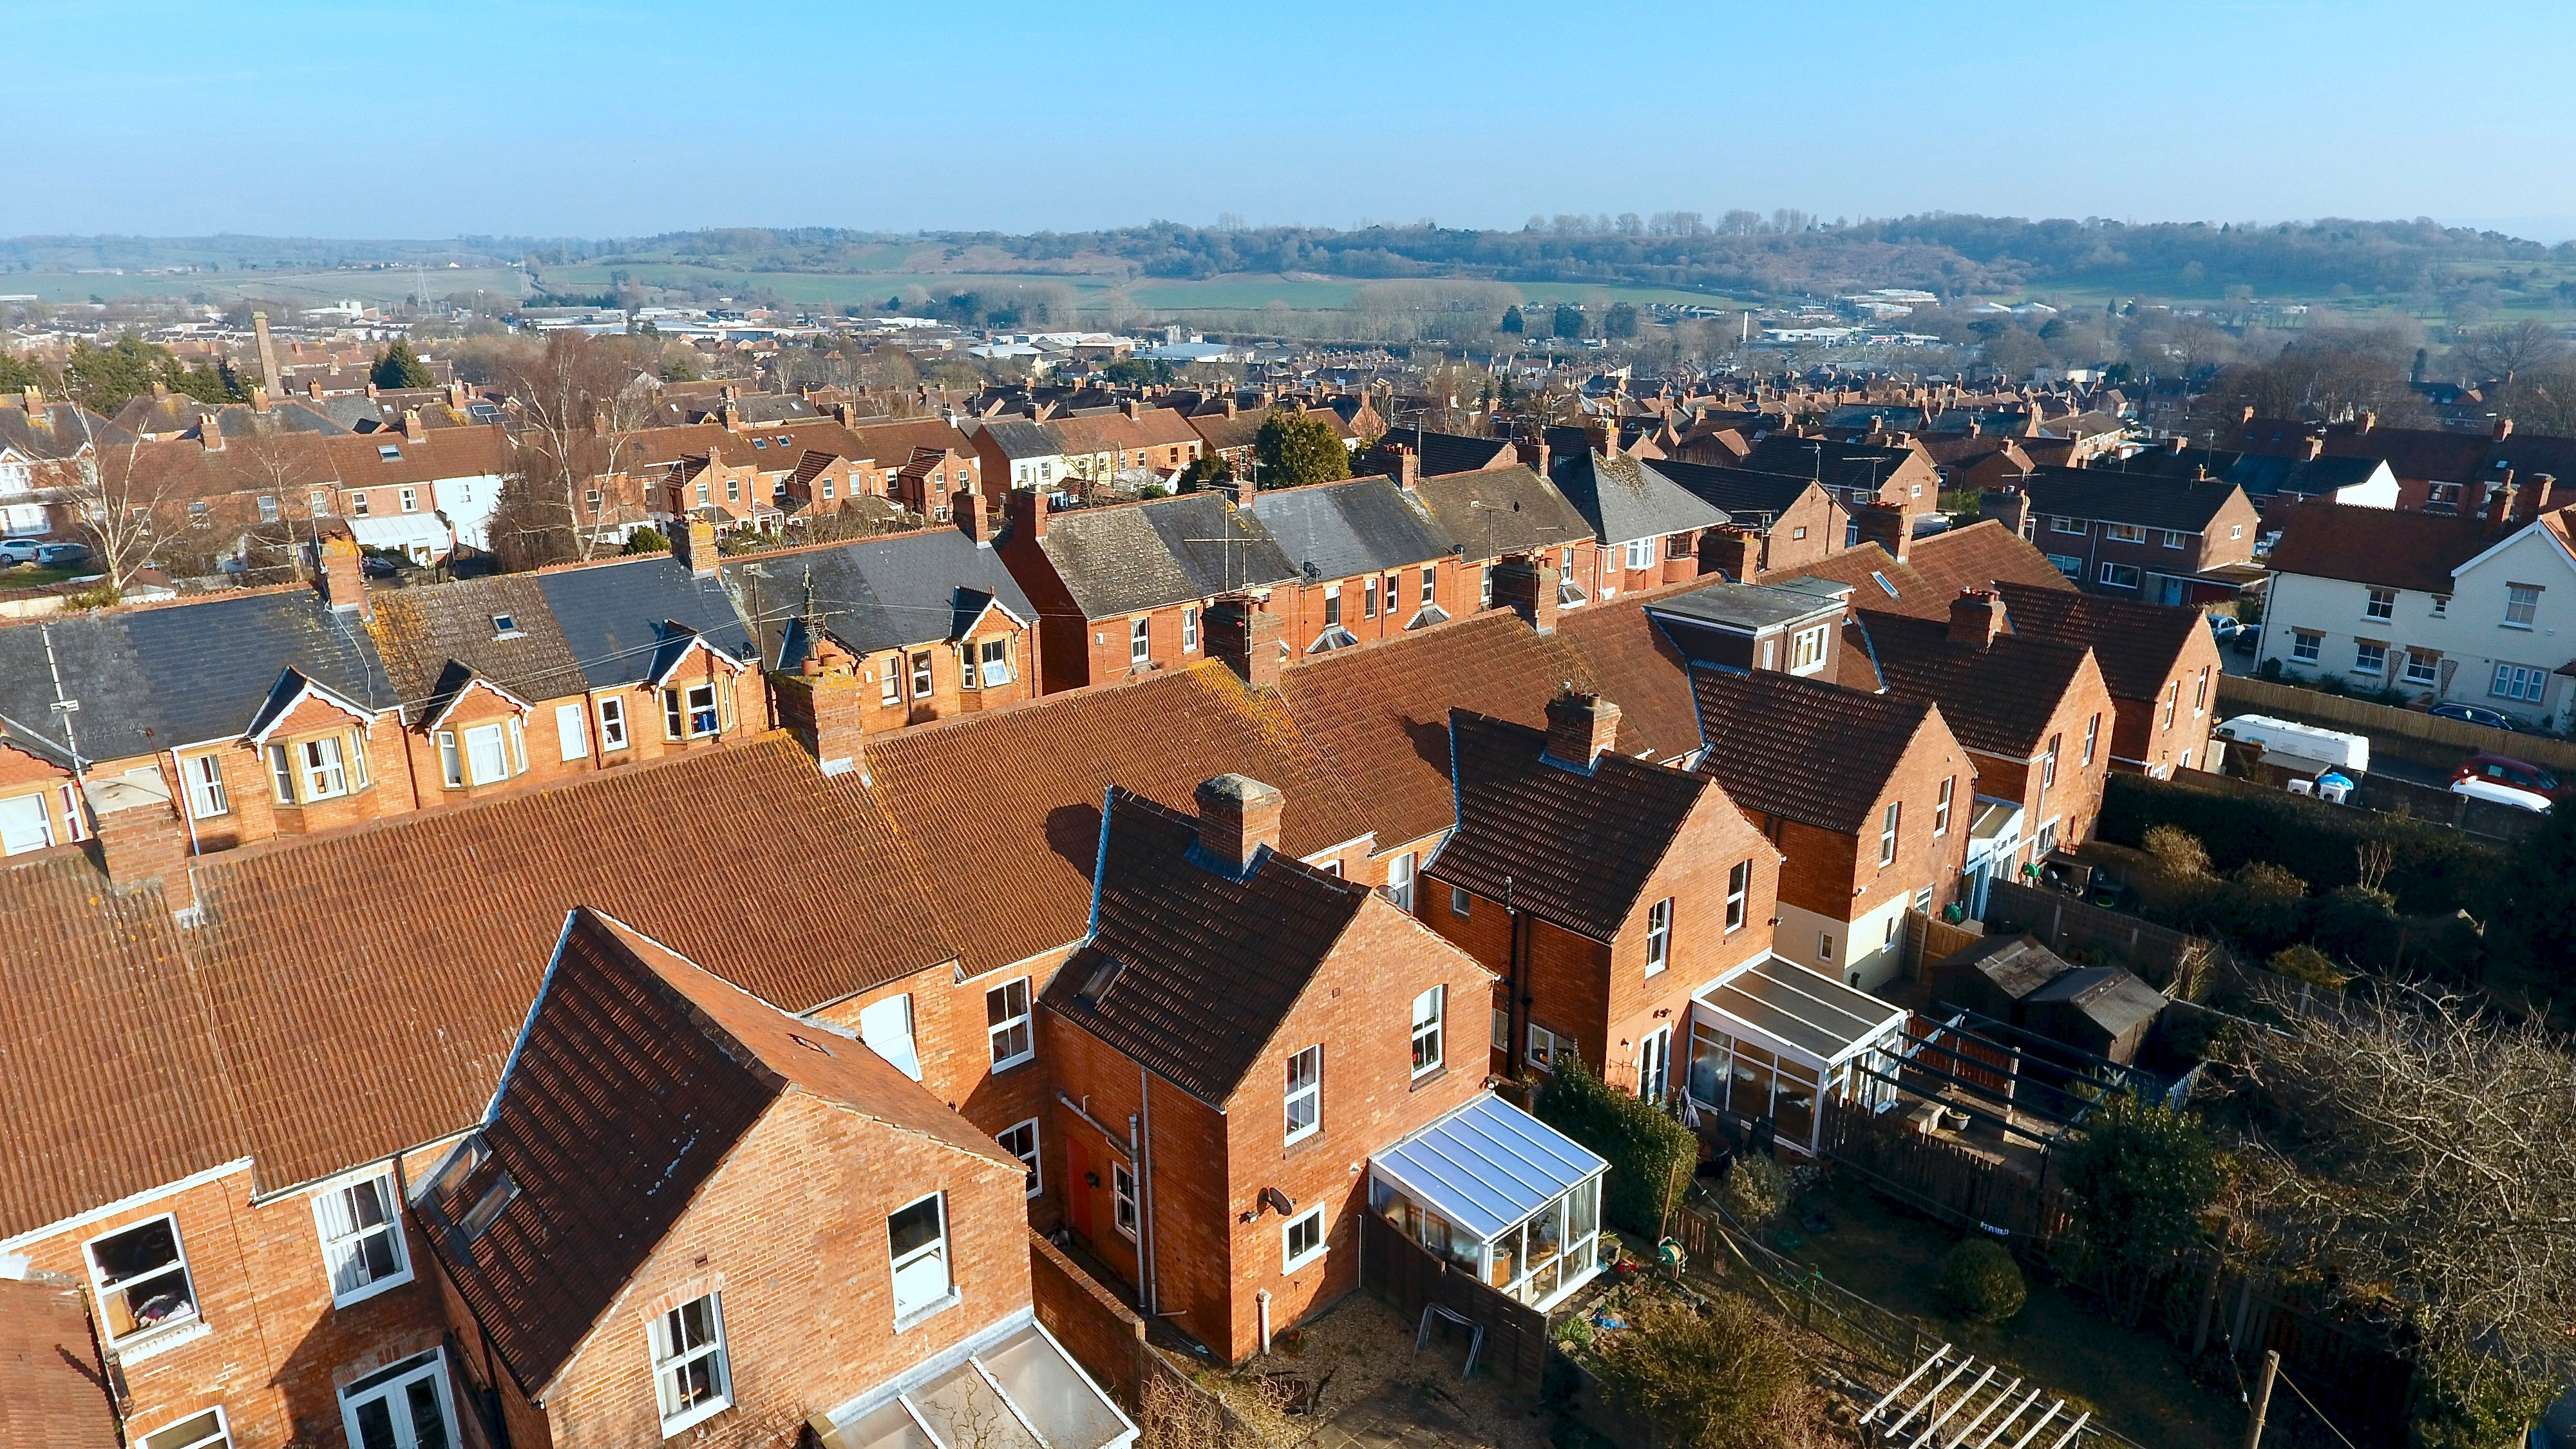 Aerial view of British housing development, in Yeovil, Somerset- England UK; Shutterstock ID 1038269764; purchase_order: N/A; job: PJ July 2023 Antony Parkinson; client: ; other: 